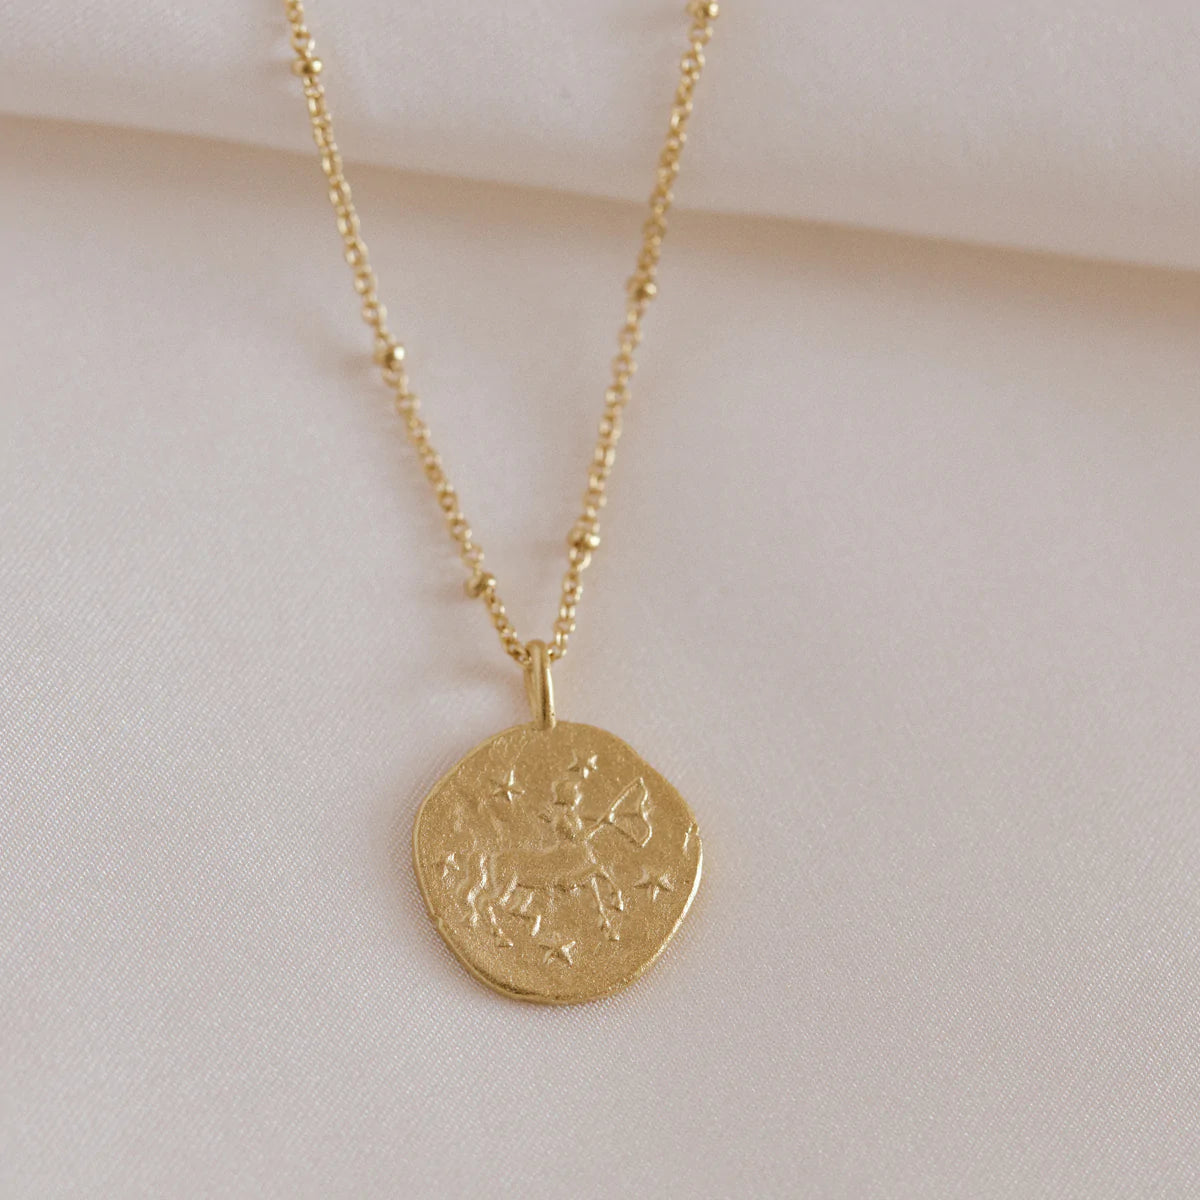 Sagittarius reflects a unique personality with their loyalty, assertiveness and compassion. Show your true self set in gold. 24K sustainable gold plated pendant and chain ethically made in France in Agape Studio's Parisian workshop. 